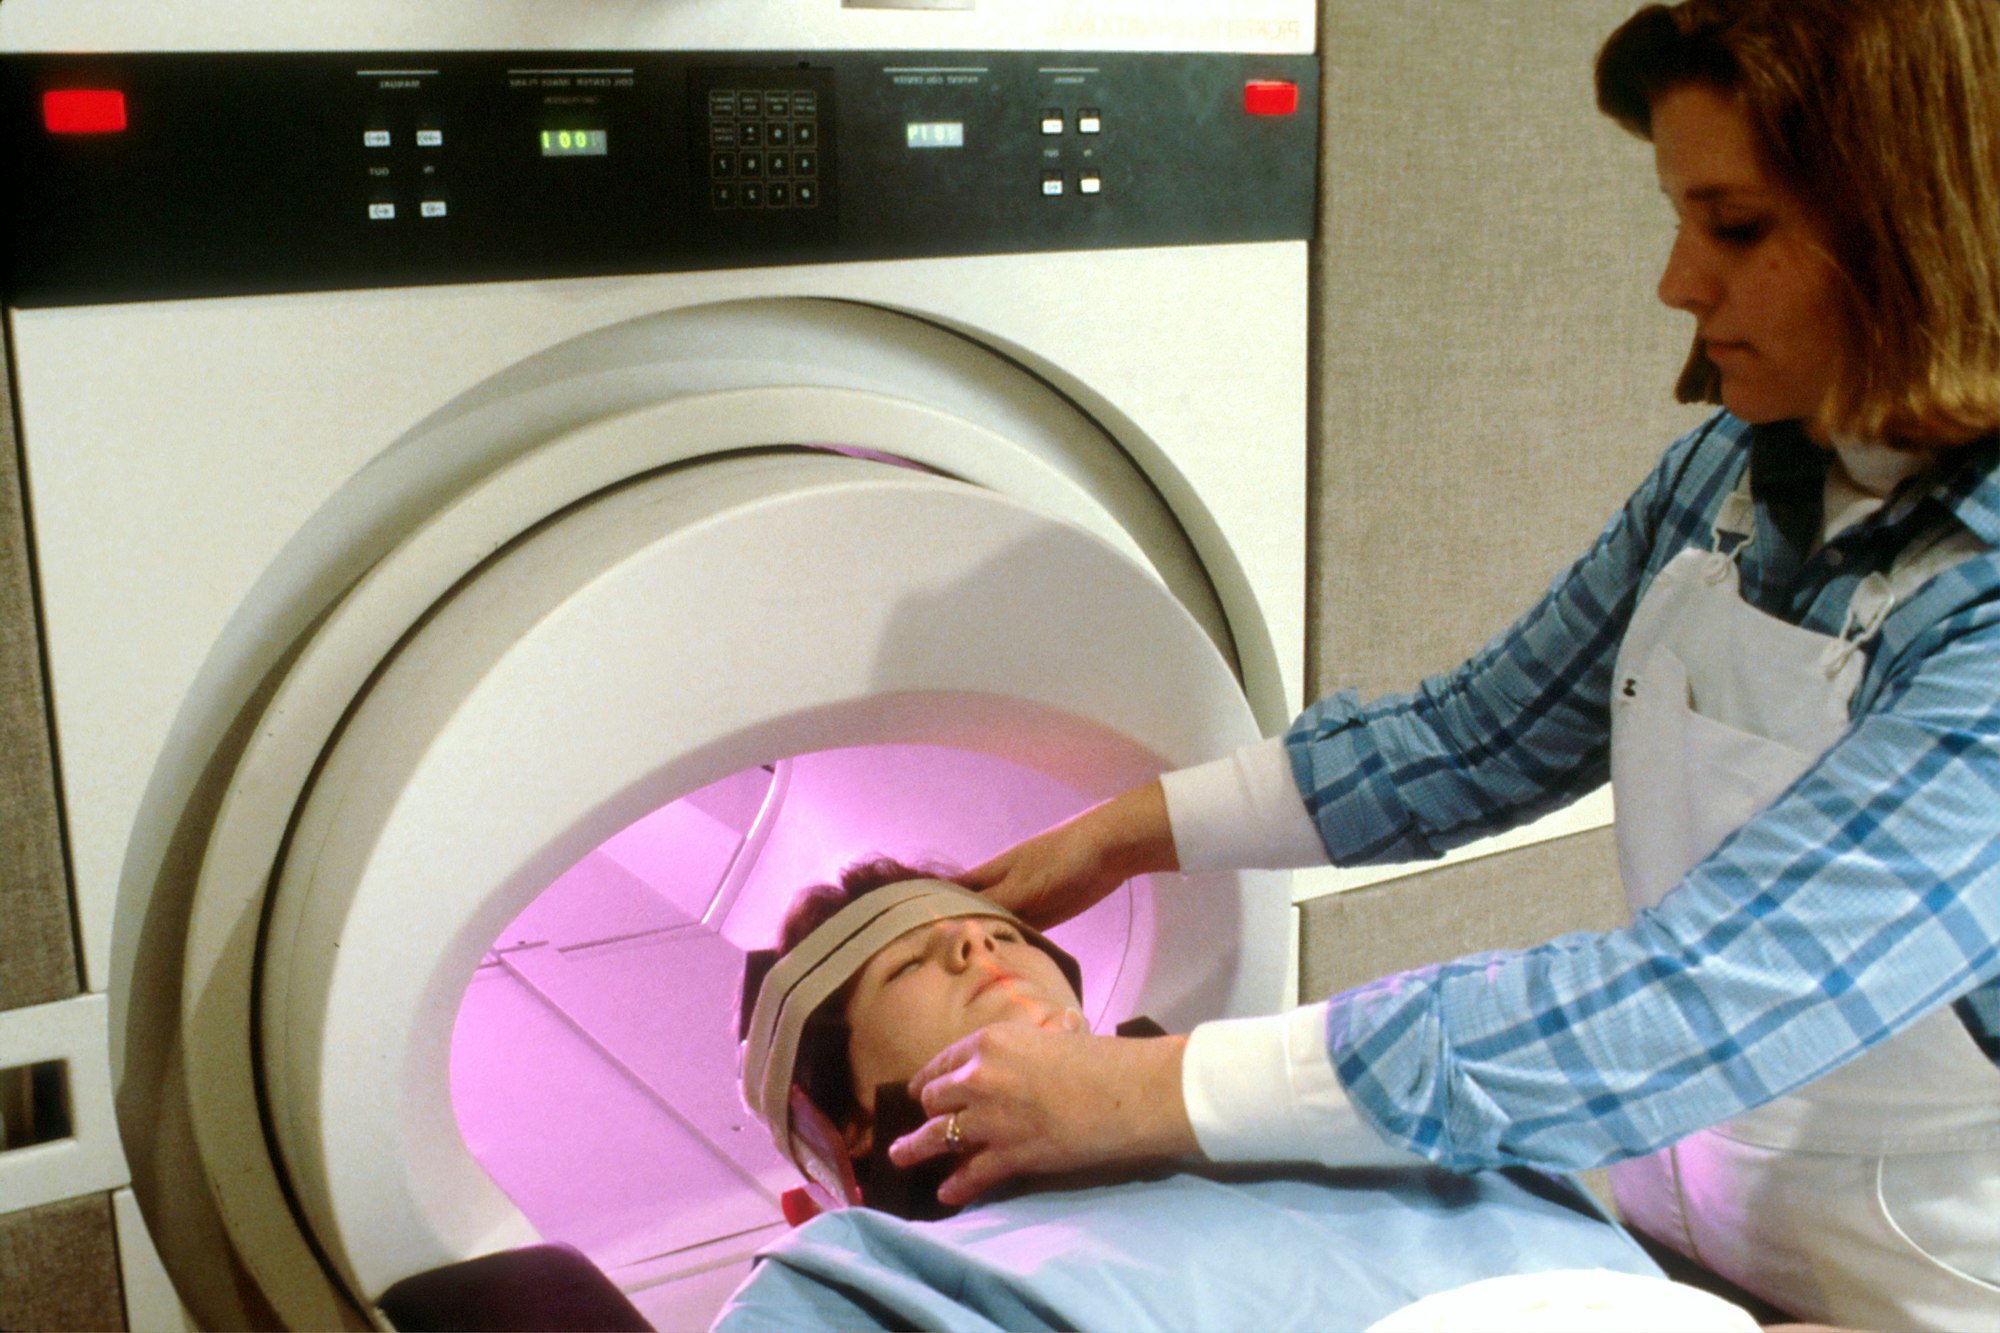 A Caucasian woman's head is being secured by a Caucasian female technician, preparing the patient for magnetic resonance imaging (MRI).